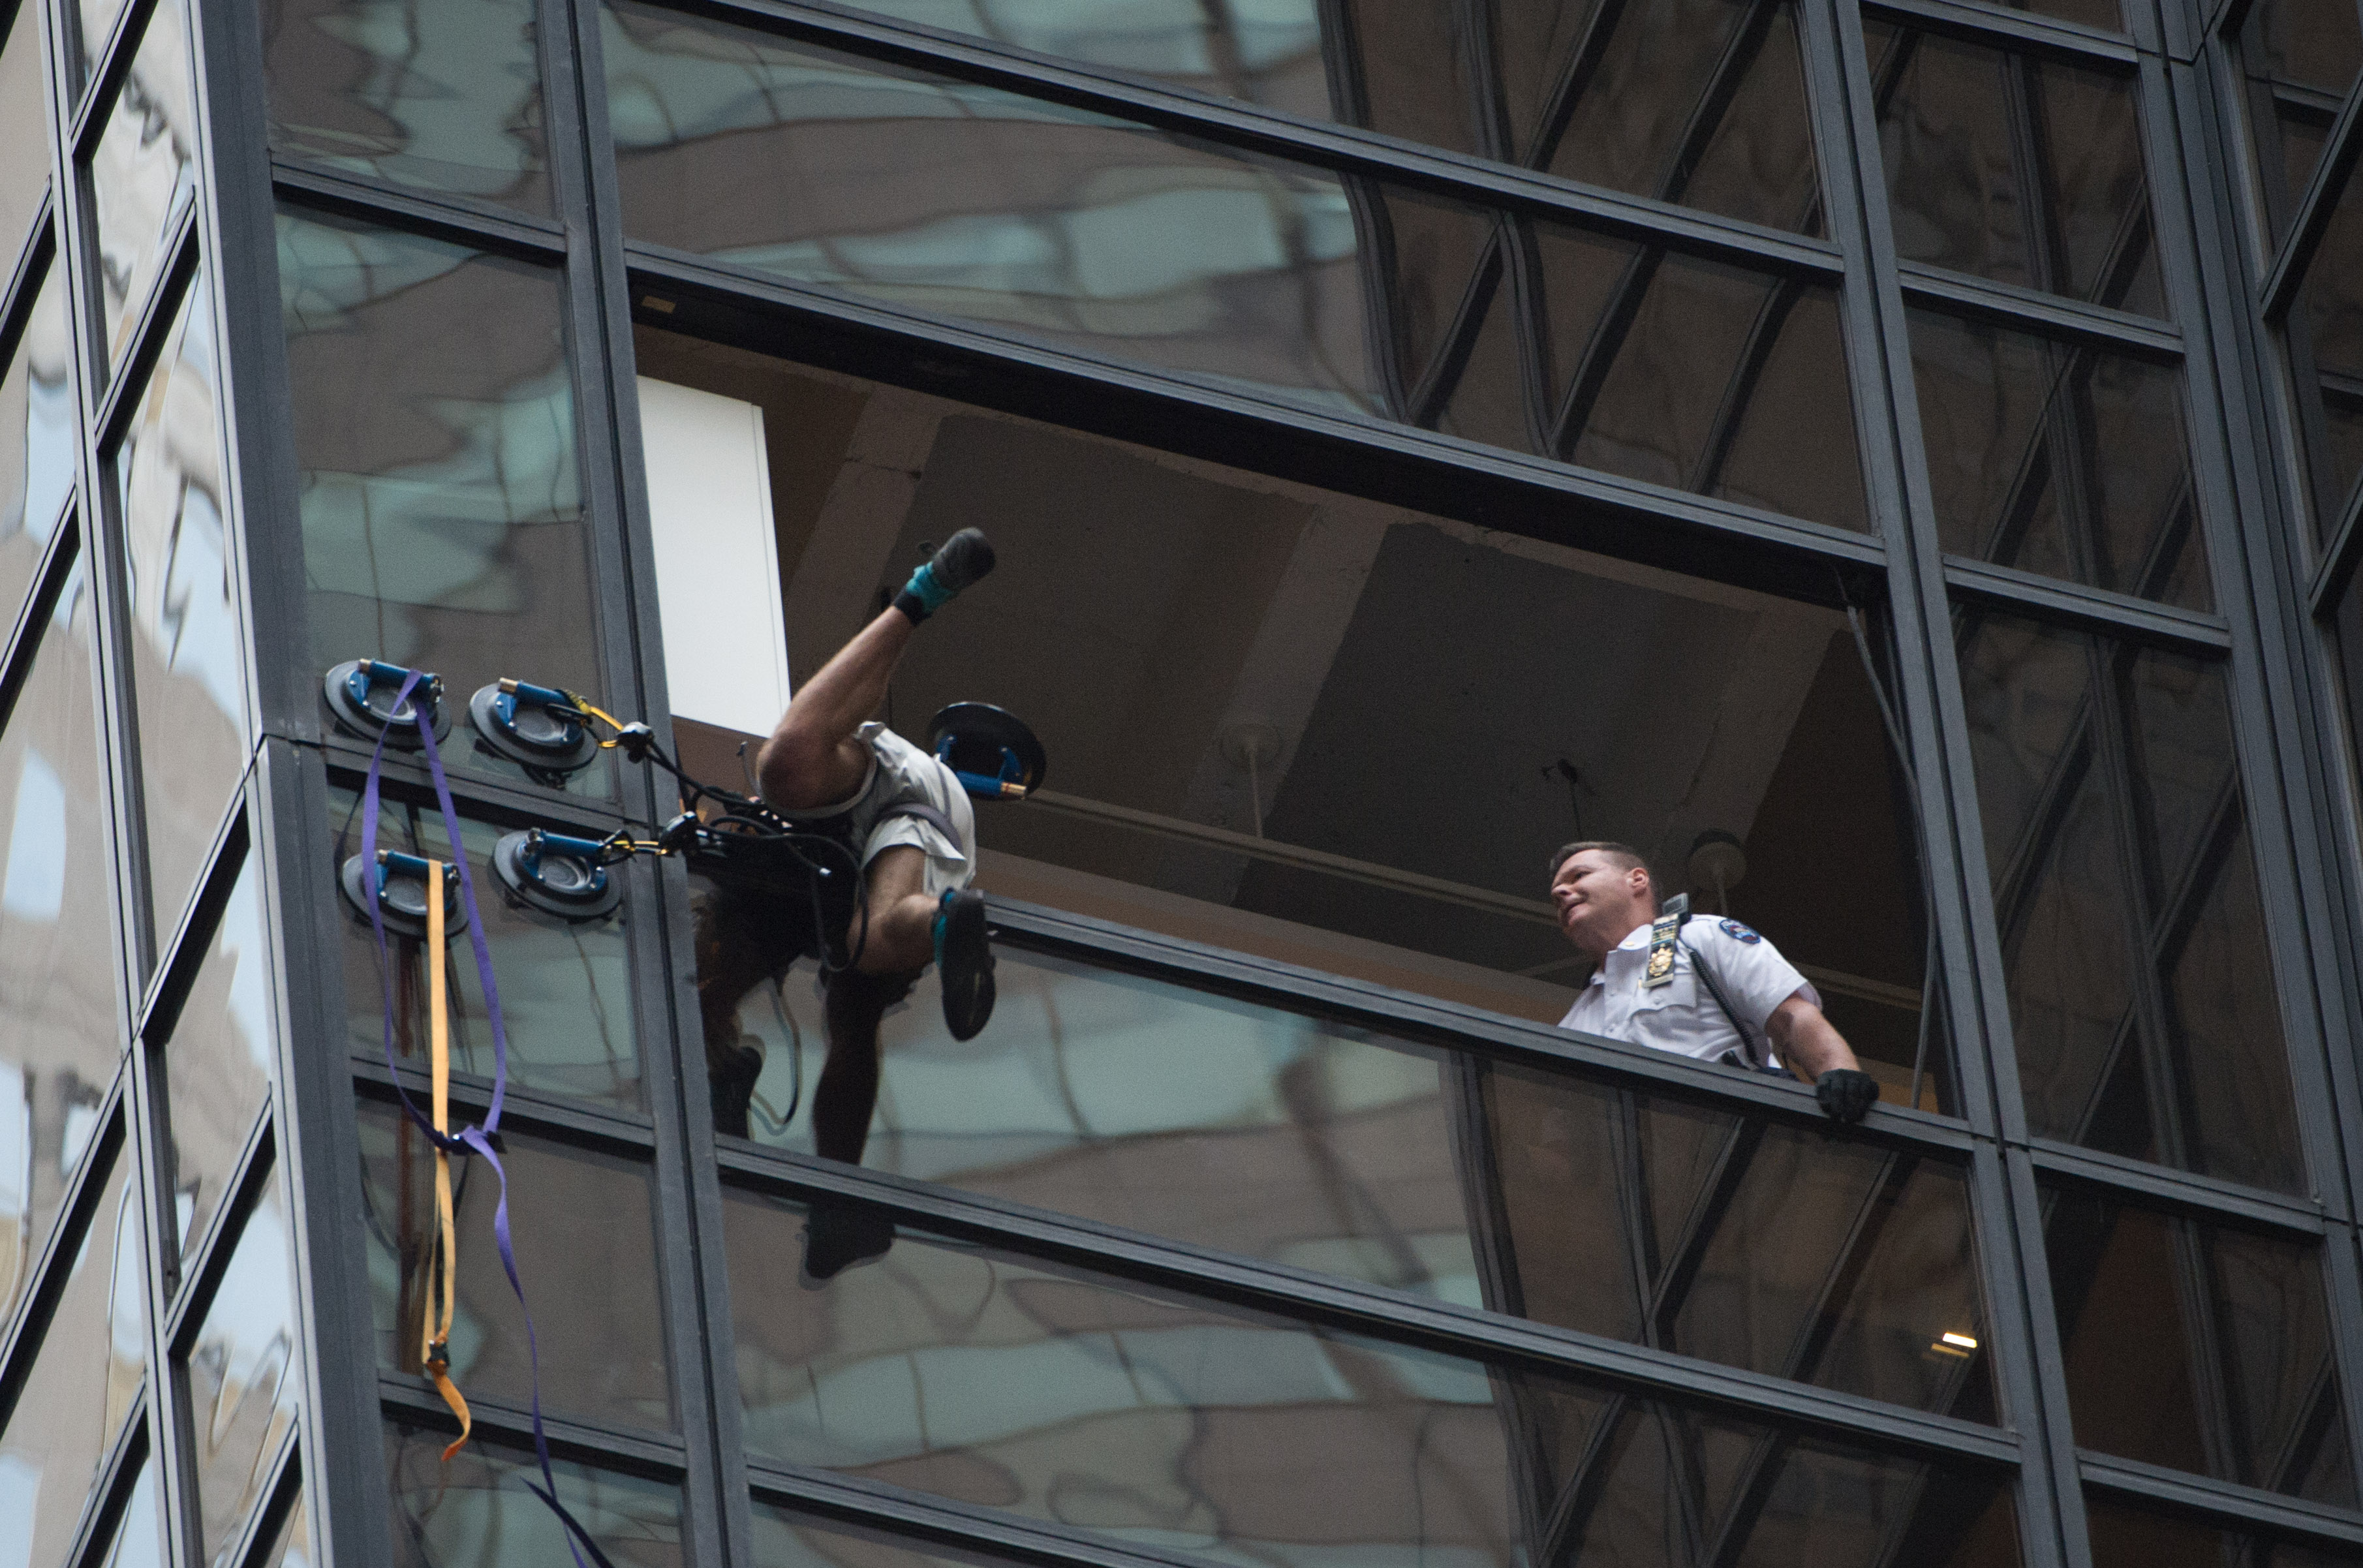 Police grab an unidentified man scaling Trump Tower using suction cups, August 10, 2016 in New York. 
                      Police on August 10, 2016 captured a climber scaling Trump Tower, dragging him to safety through an open window on the 21st floor of the New York headquarters of the Republican nominee for US president. Live television footage showed uniformed officers reaching out and grabbing the young man -- dressed in grey shorts, an olive T-shirt and white cap -- around three hours after he started his ascent using five suction cups. "The climber has been taken into custody," a police spokesman tweeted. (Bryan R. Smith—Getty Images)